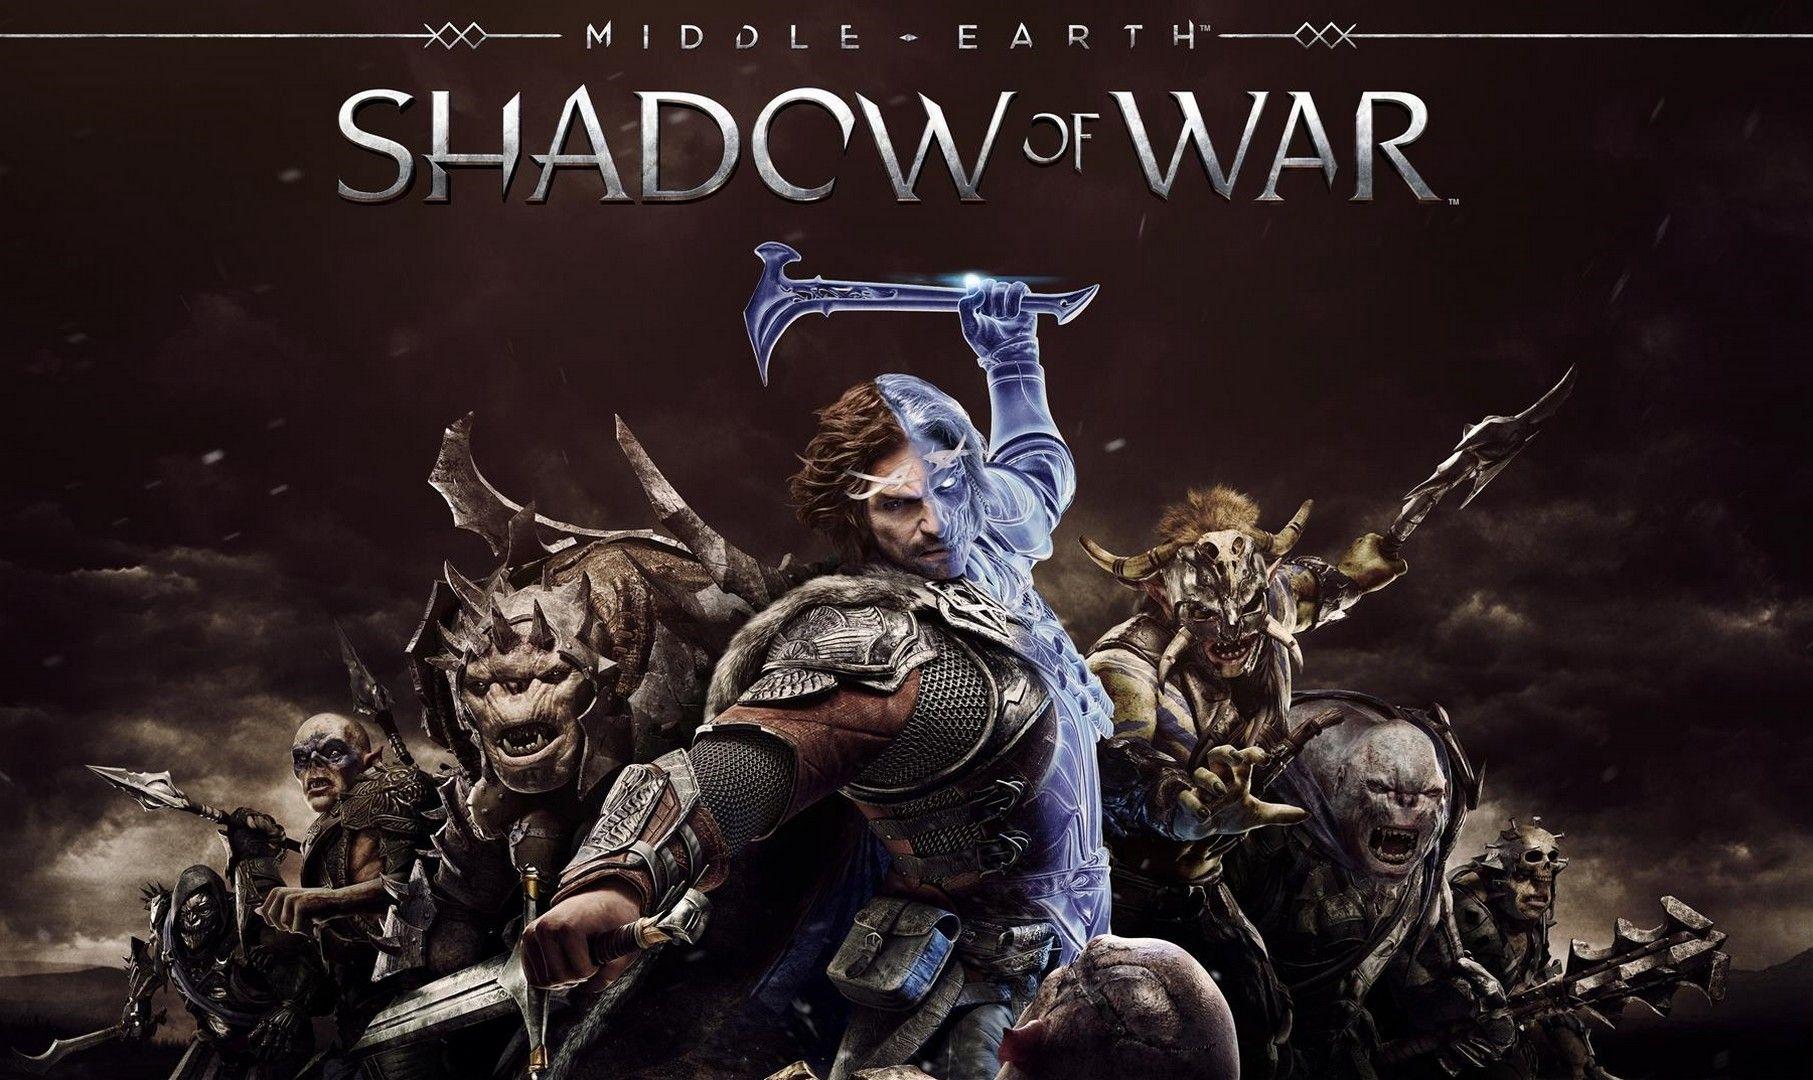 Middle Earth: Shadow Of War Wallpaper HD. Middle Earth: Shadow